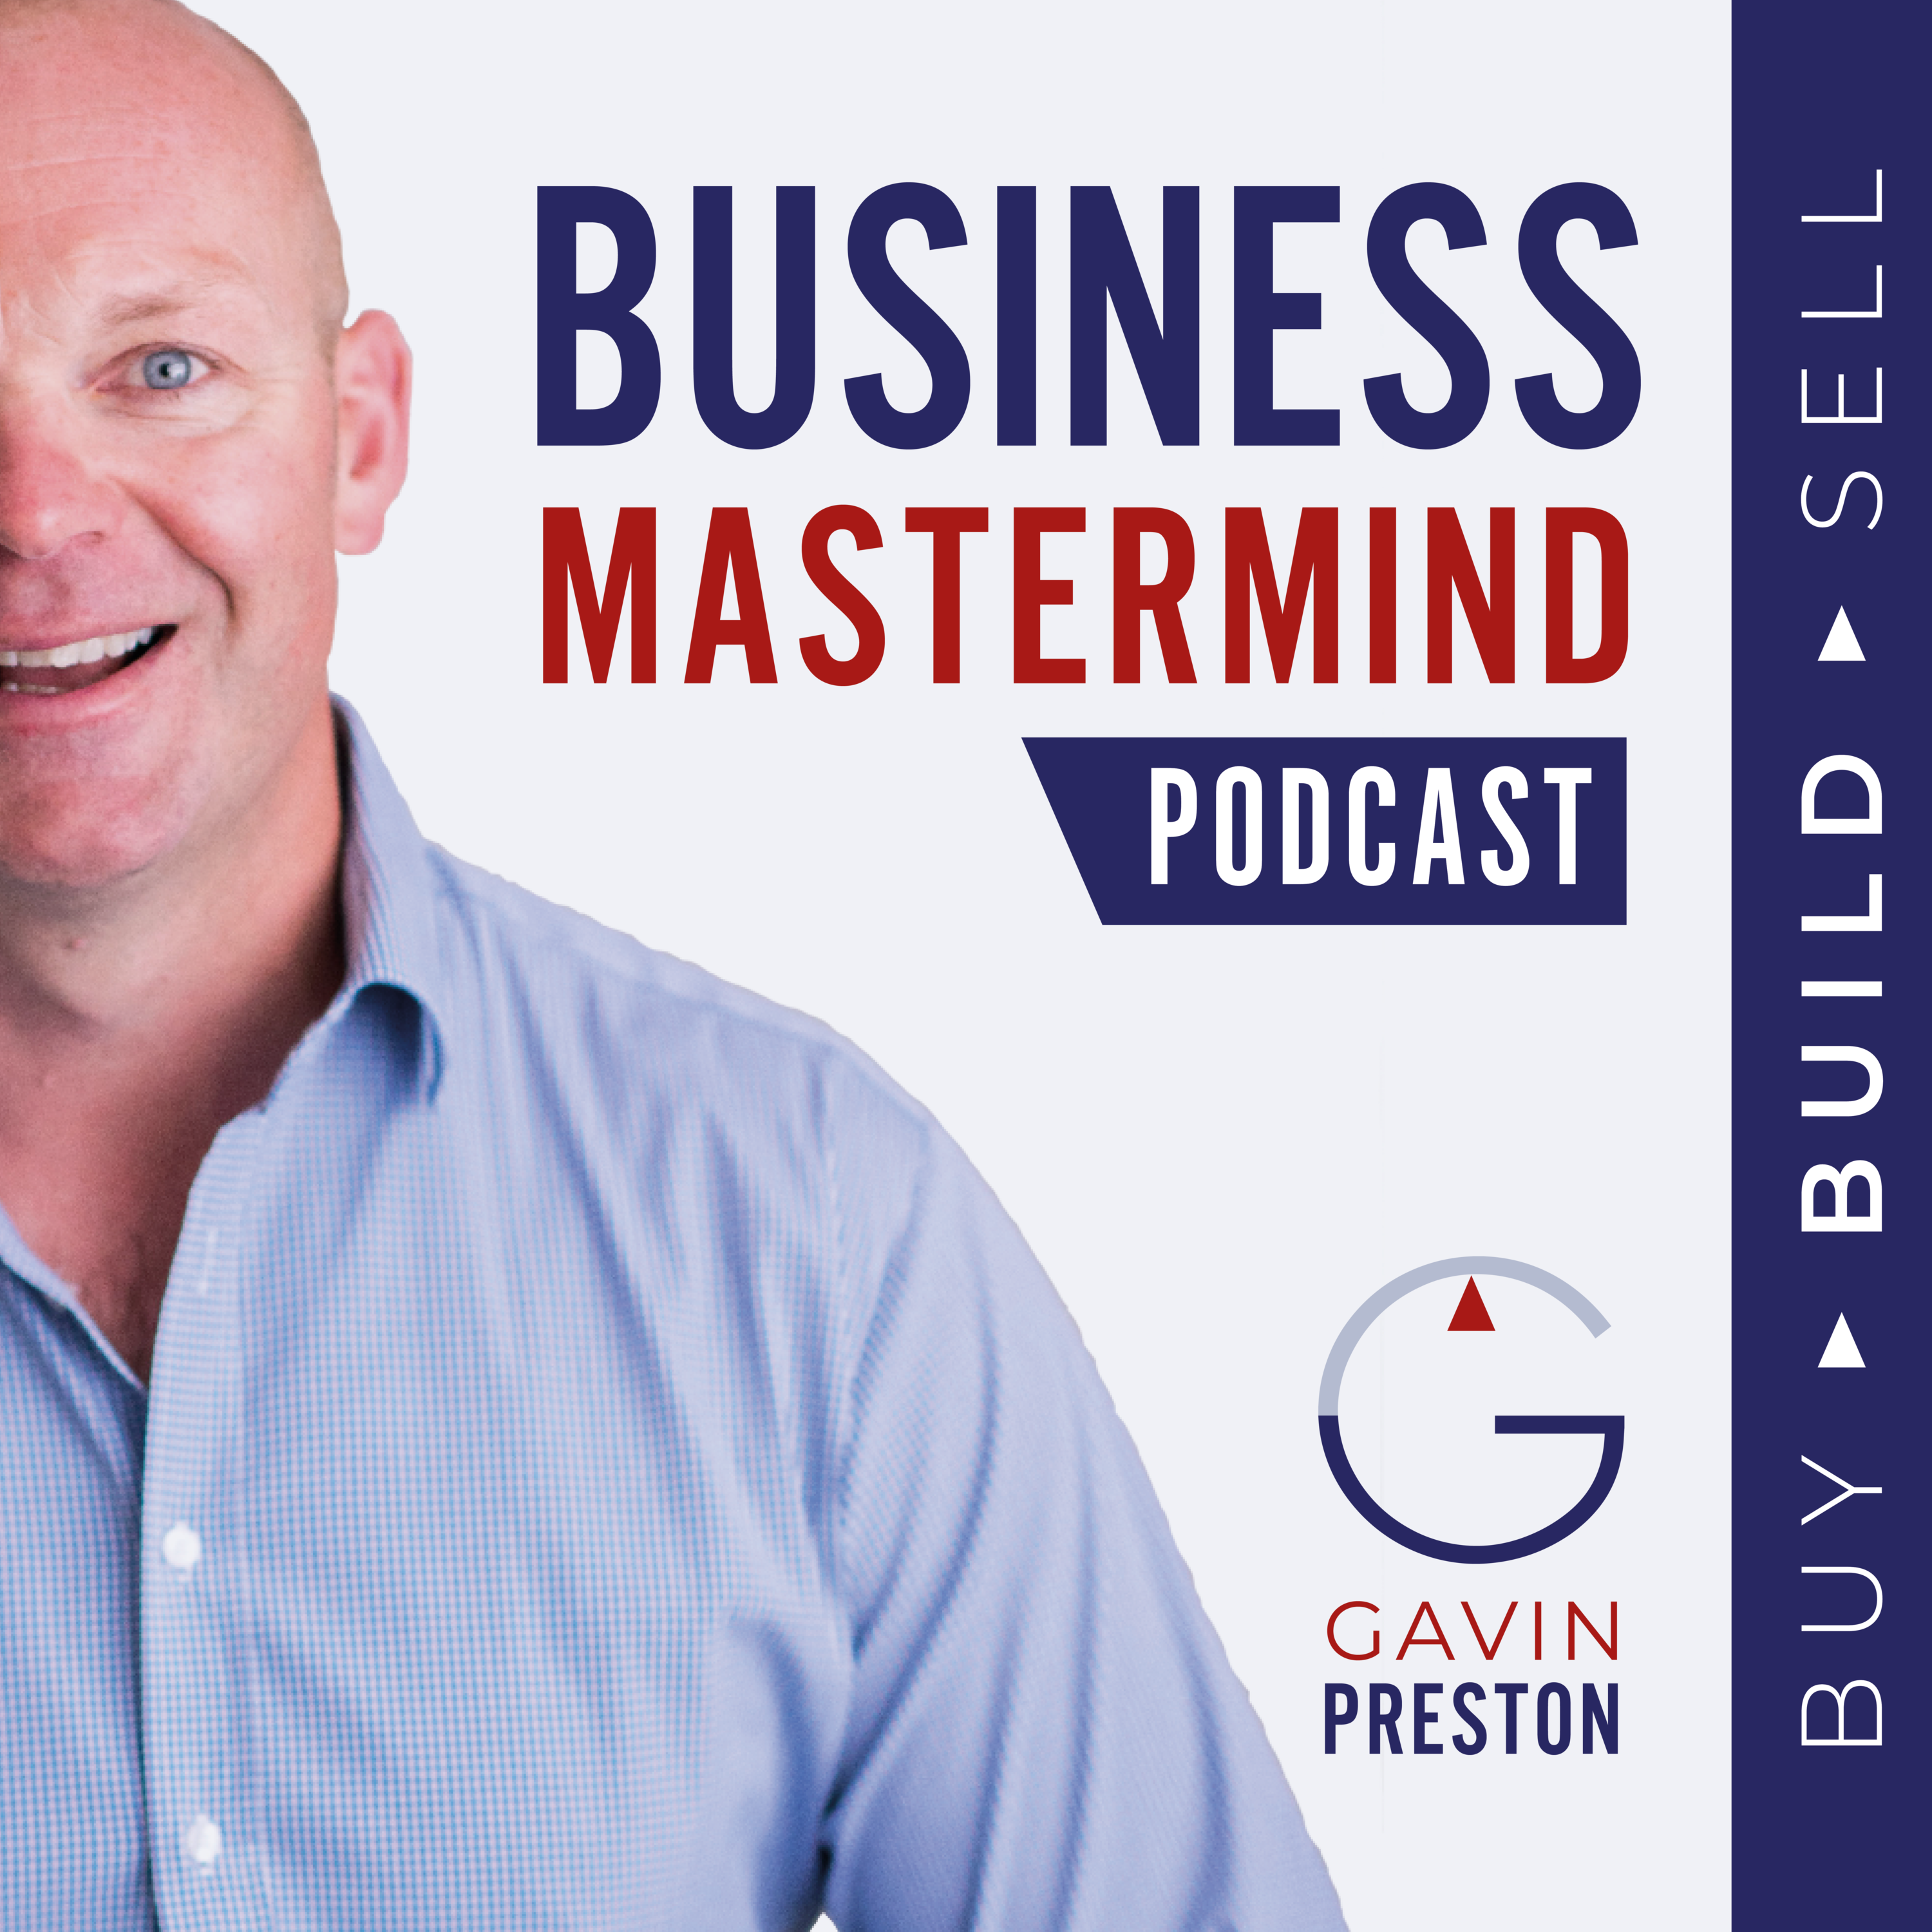 Buy, Sell And Build - Guy Bartlett On Business Buying Strategies